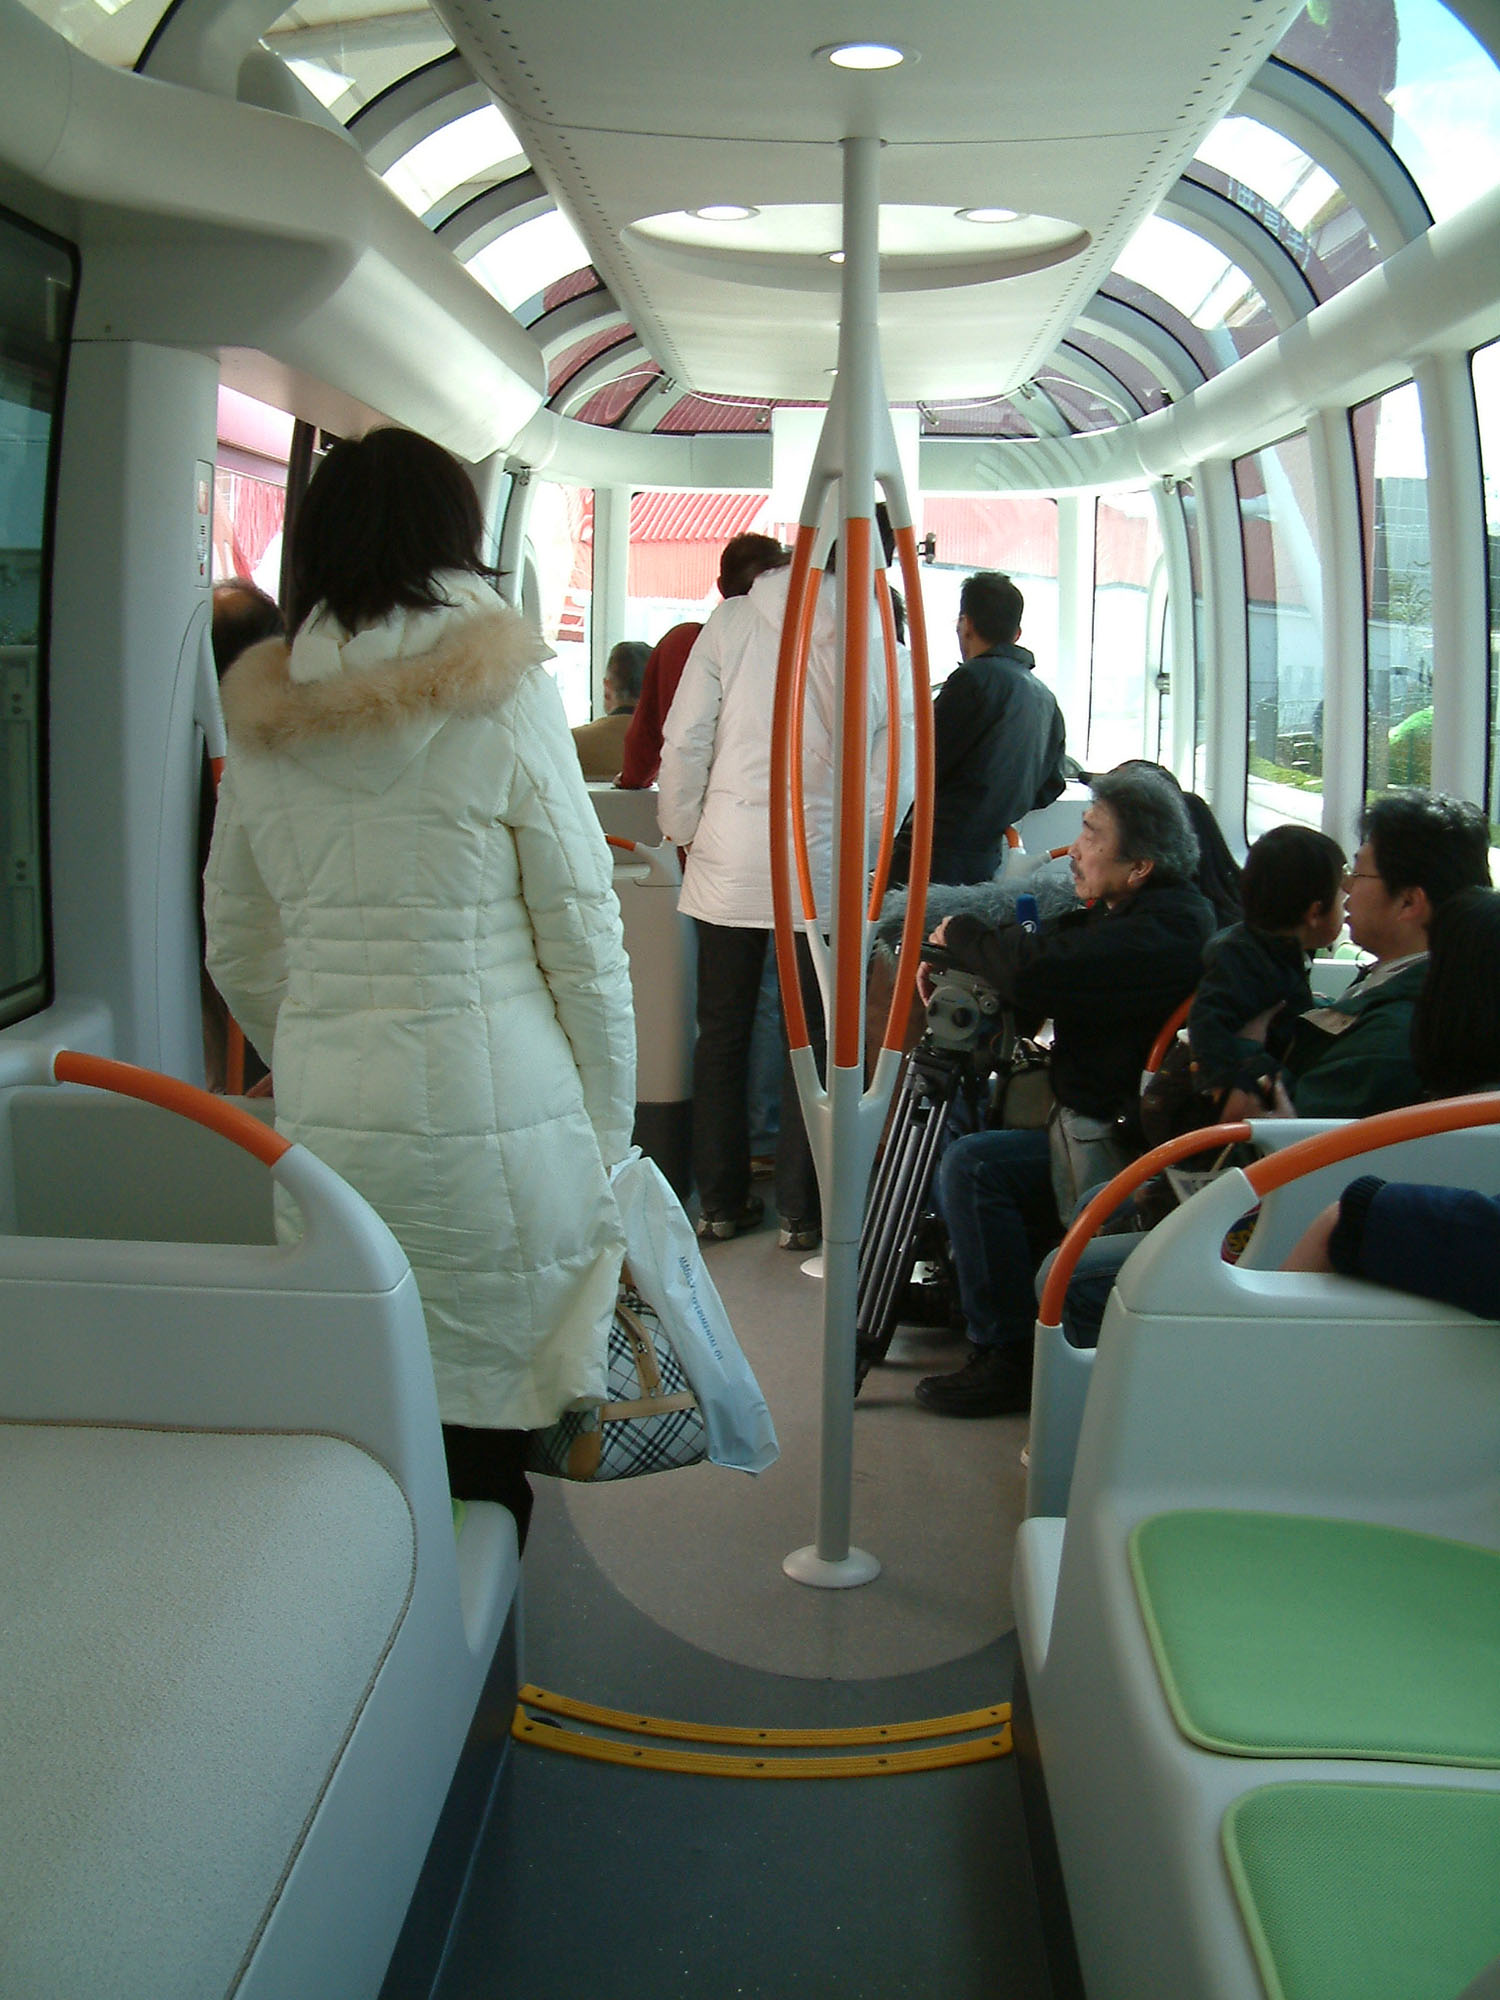 Fig. 20.26 Panoramic windows, as in this bus in Aichi, Japan, can dramatically improve the customer’s ability to see the outside environment.